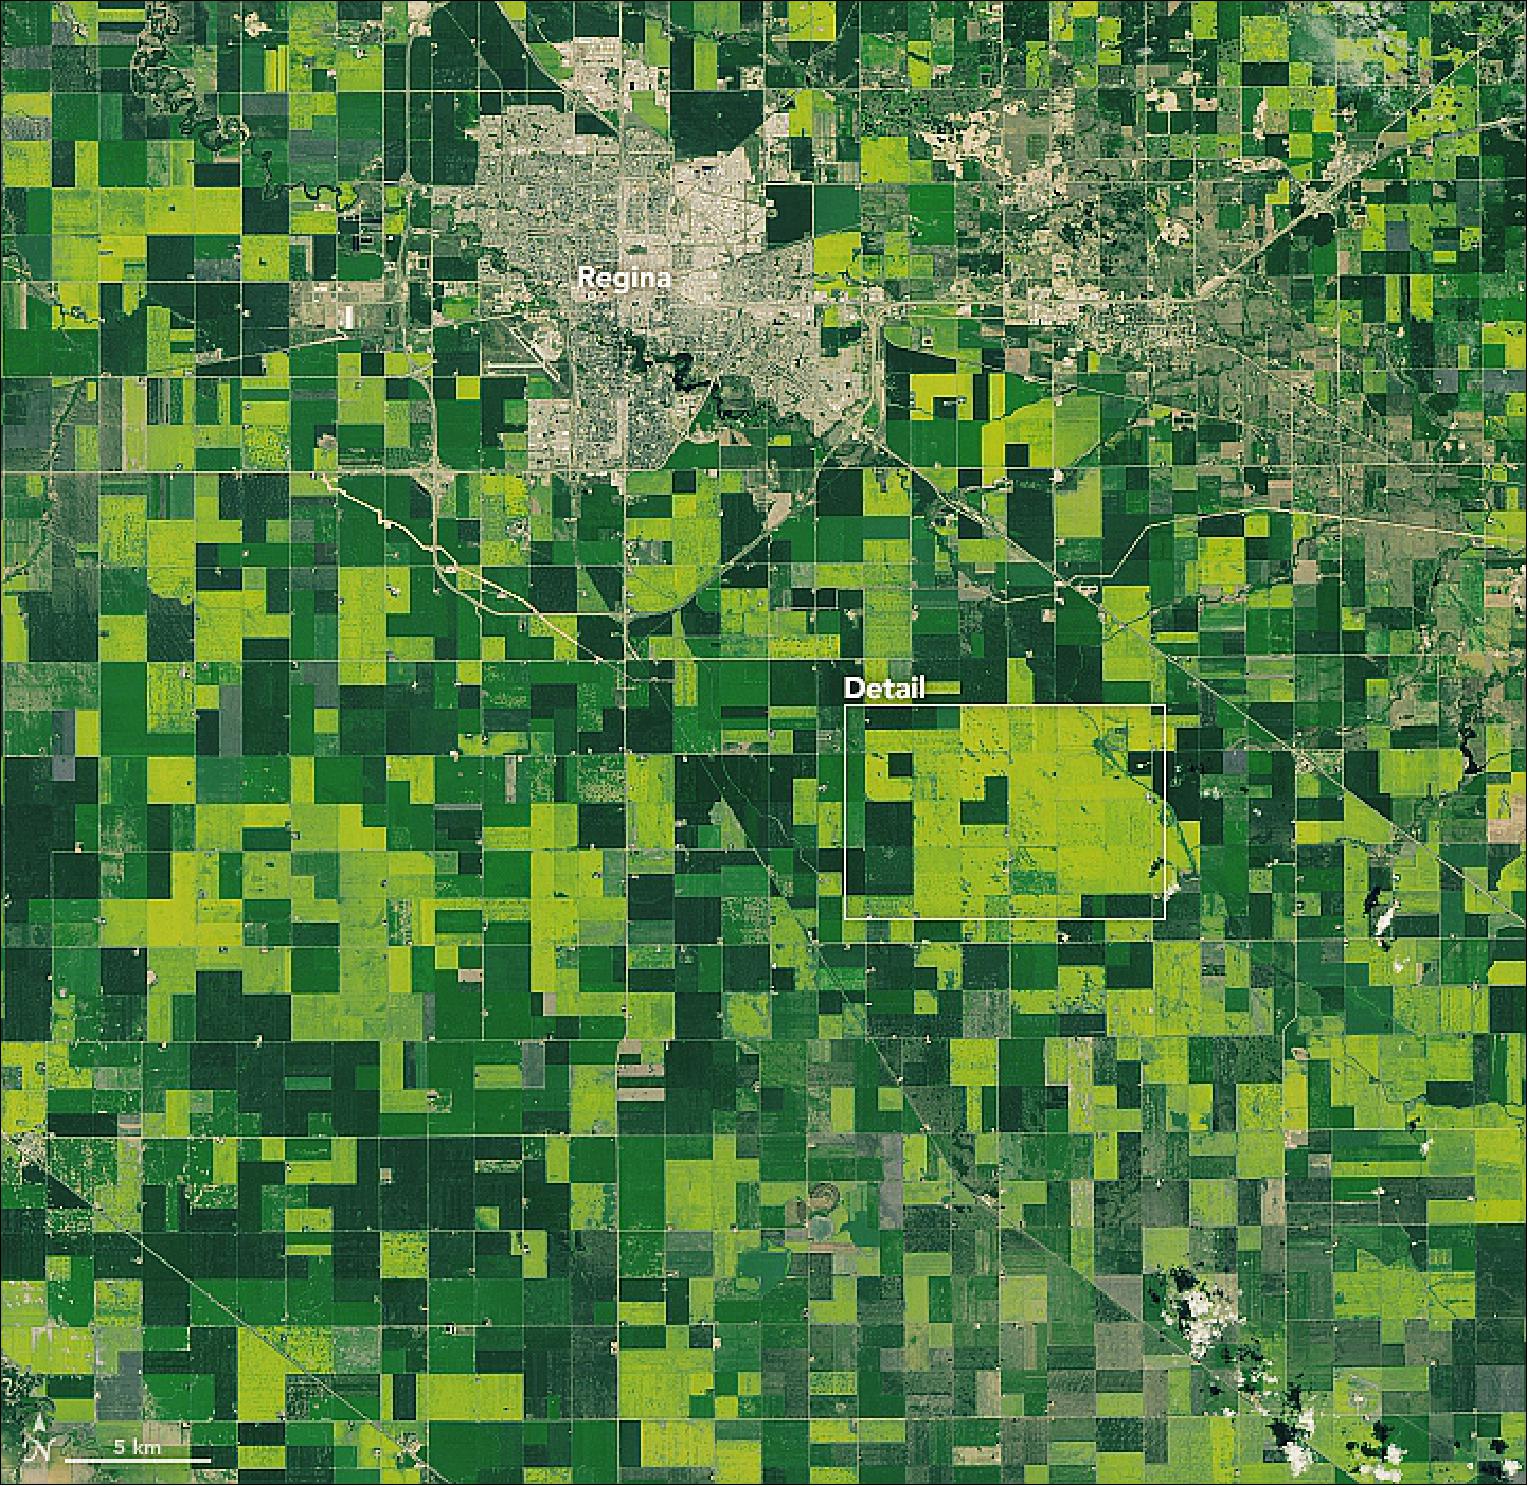 Figure 22: A day later, OLI (Operational Land Imager) on Landsat-8 acquired a more-detailed view of canola in bloom near Regina, Saskatchewan (image credit: NASA Earth Observatory, image by Lauren Dauphin, using Landsat data from the U.S. Geological Survey, Story by Adam Voiland)